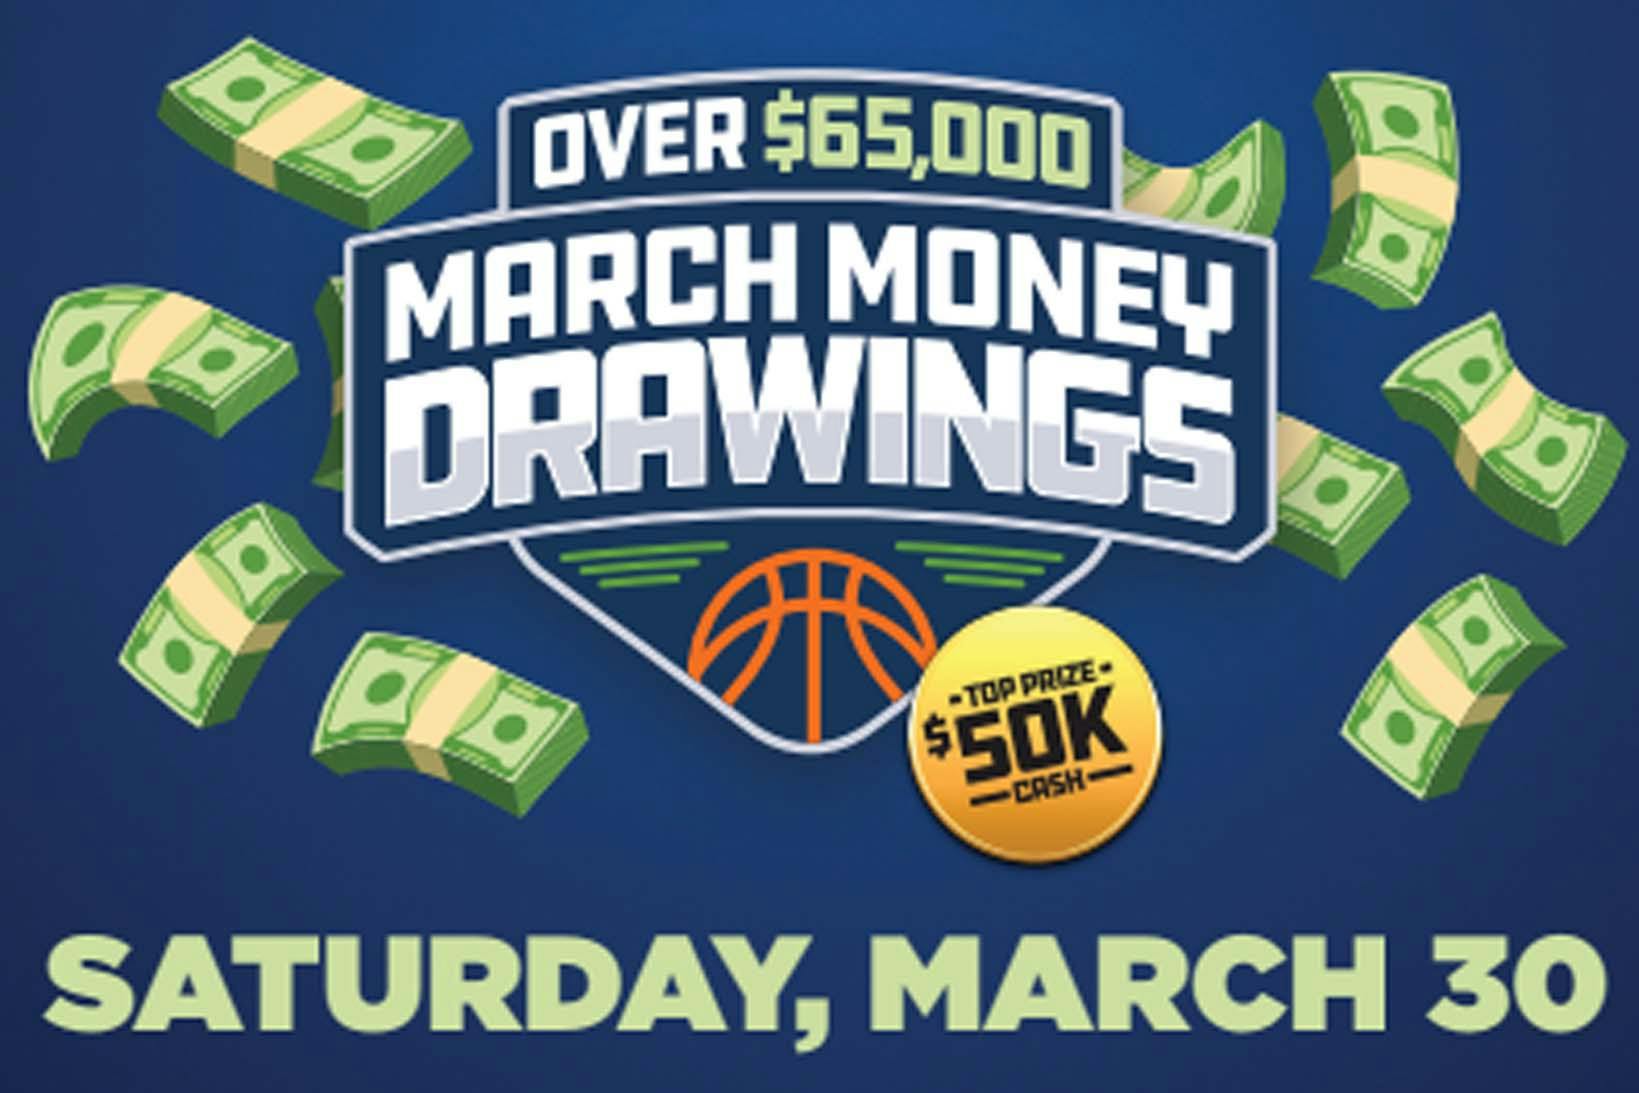 Over $65,000 March Money Drawings